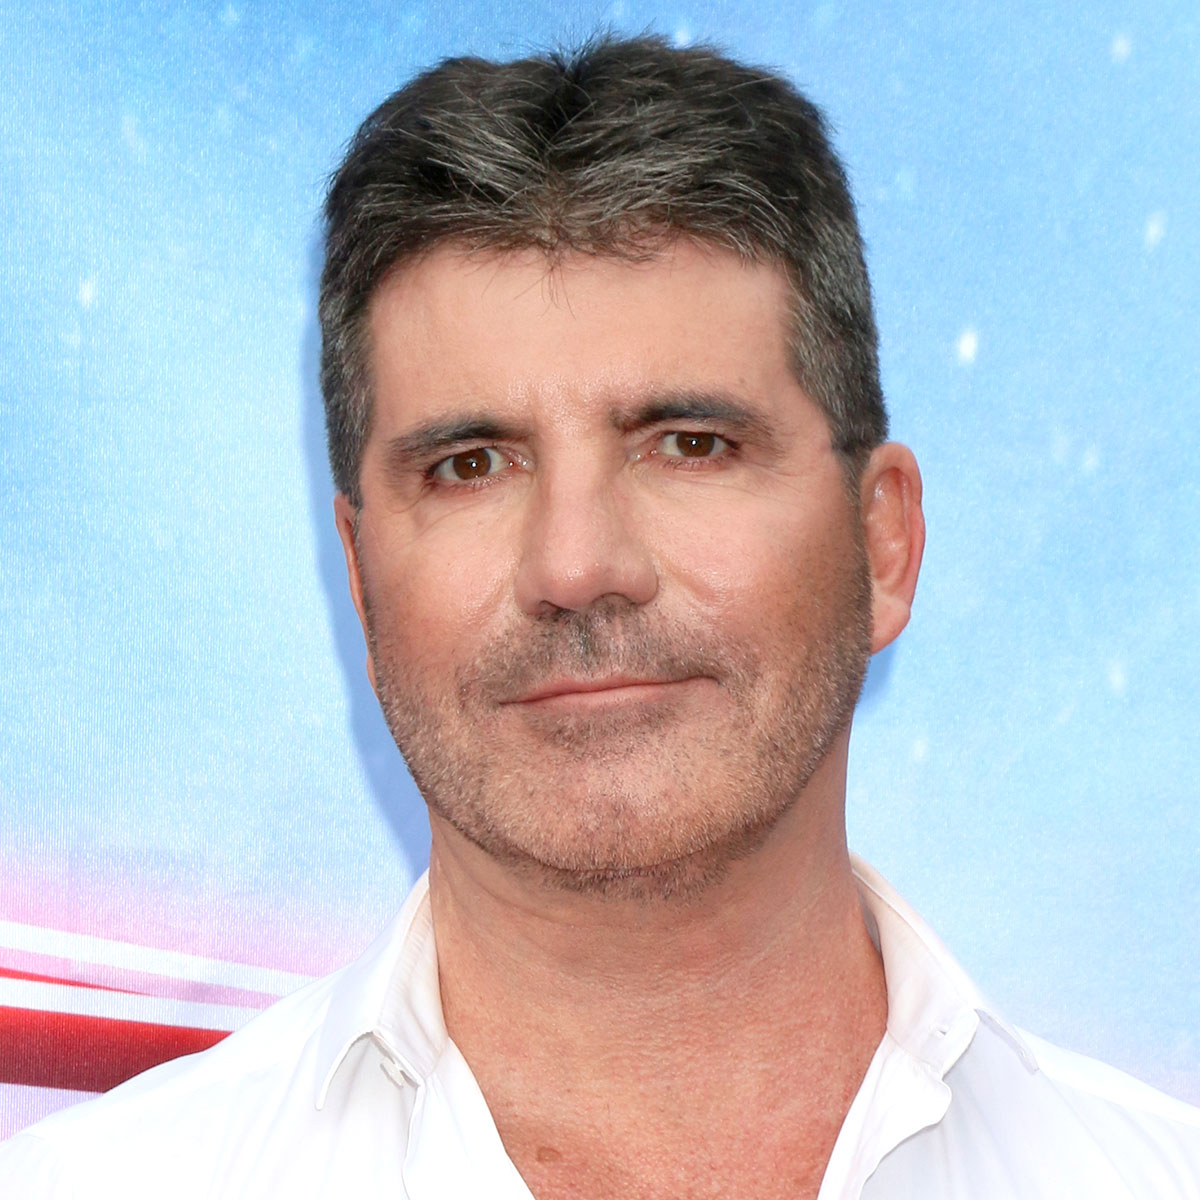 Simon Cowell’s Transformation Continues To Stun Us All - SHEfinds